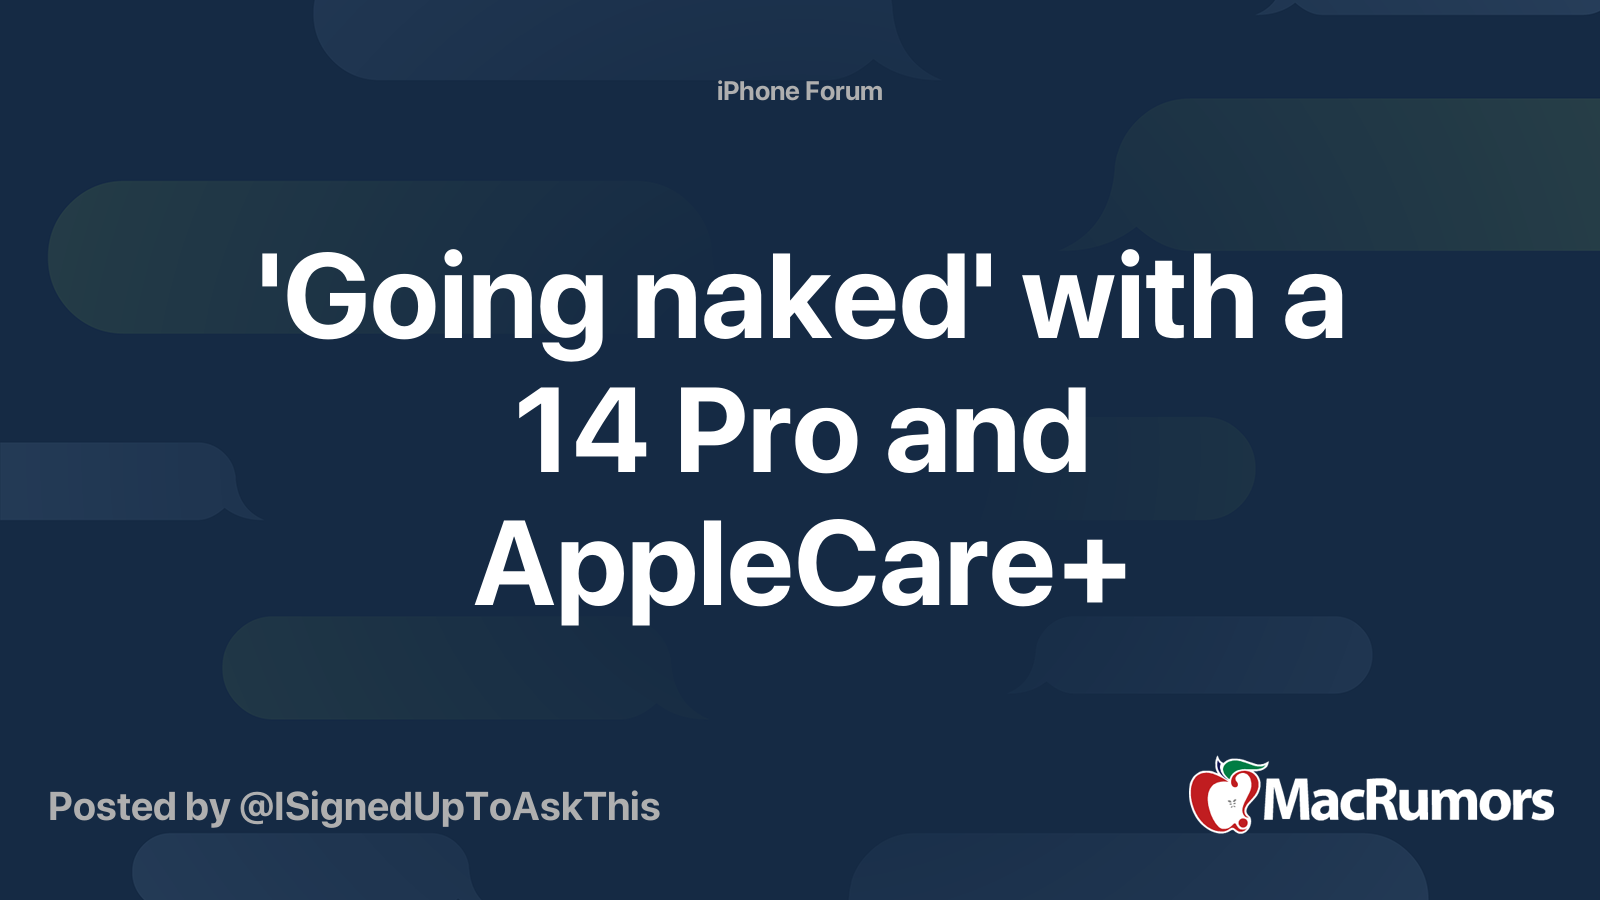 Bare Naked - for iPhone 14 Pro